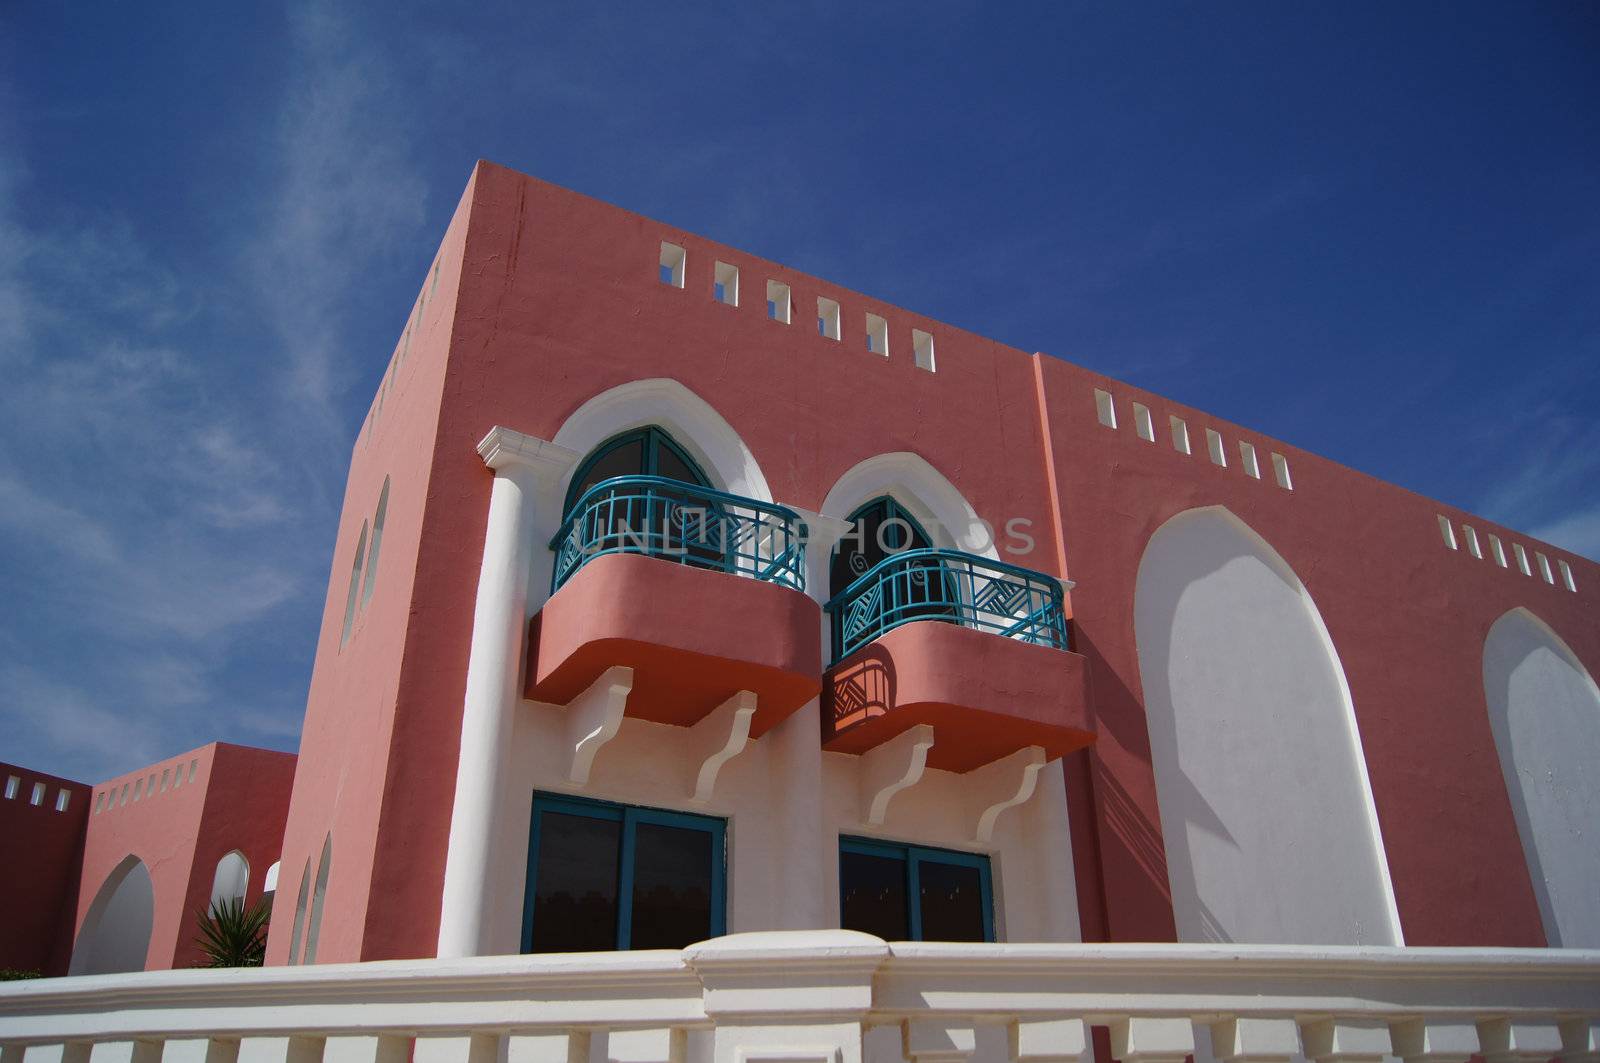 Arabic architecture: red and white walls